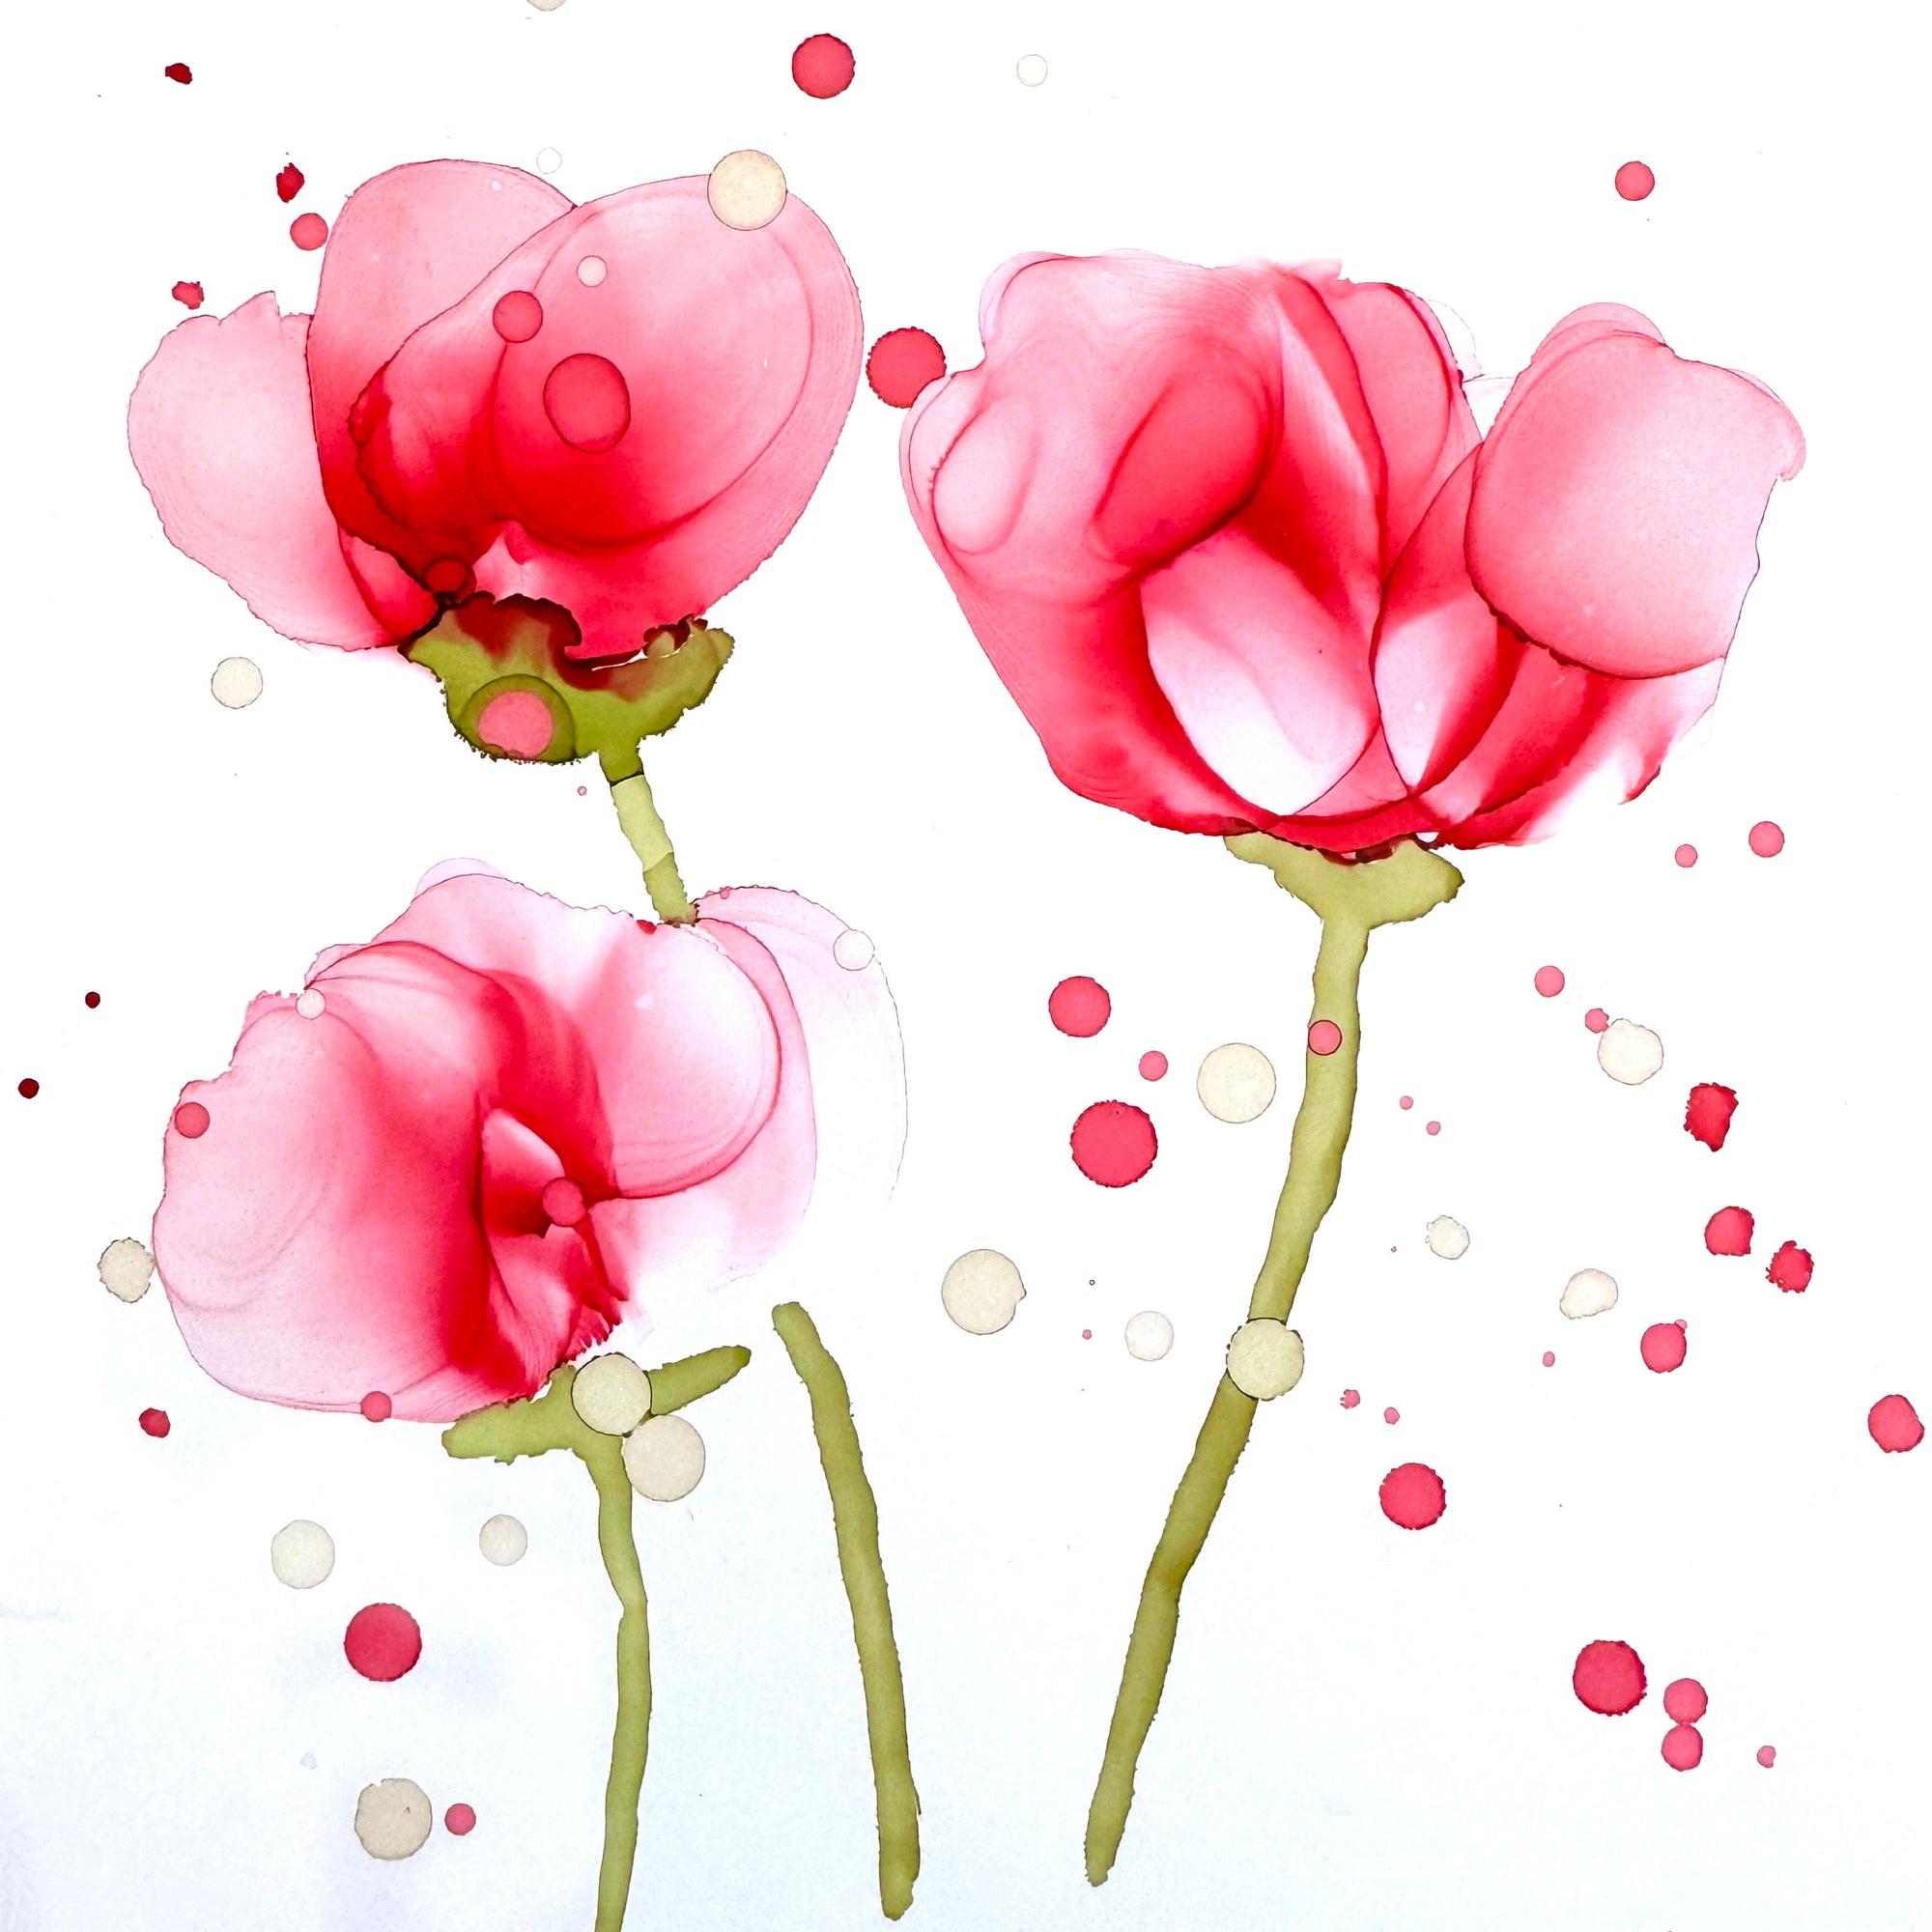 Alcohol Ink Flowers - Wed 6.19.24 @ 10A